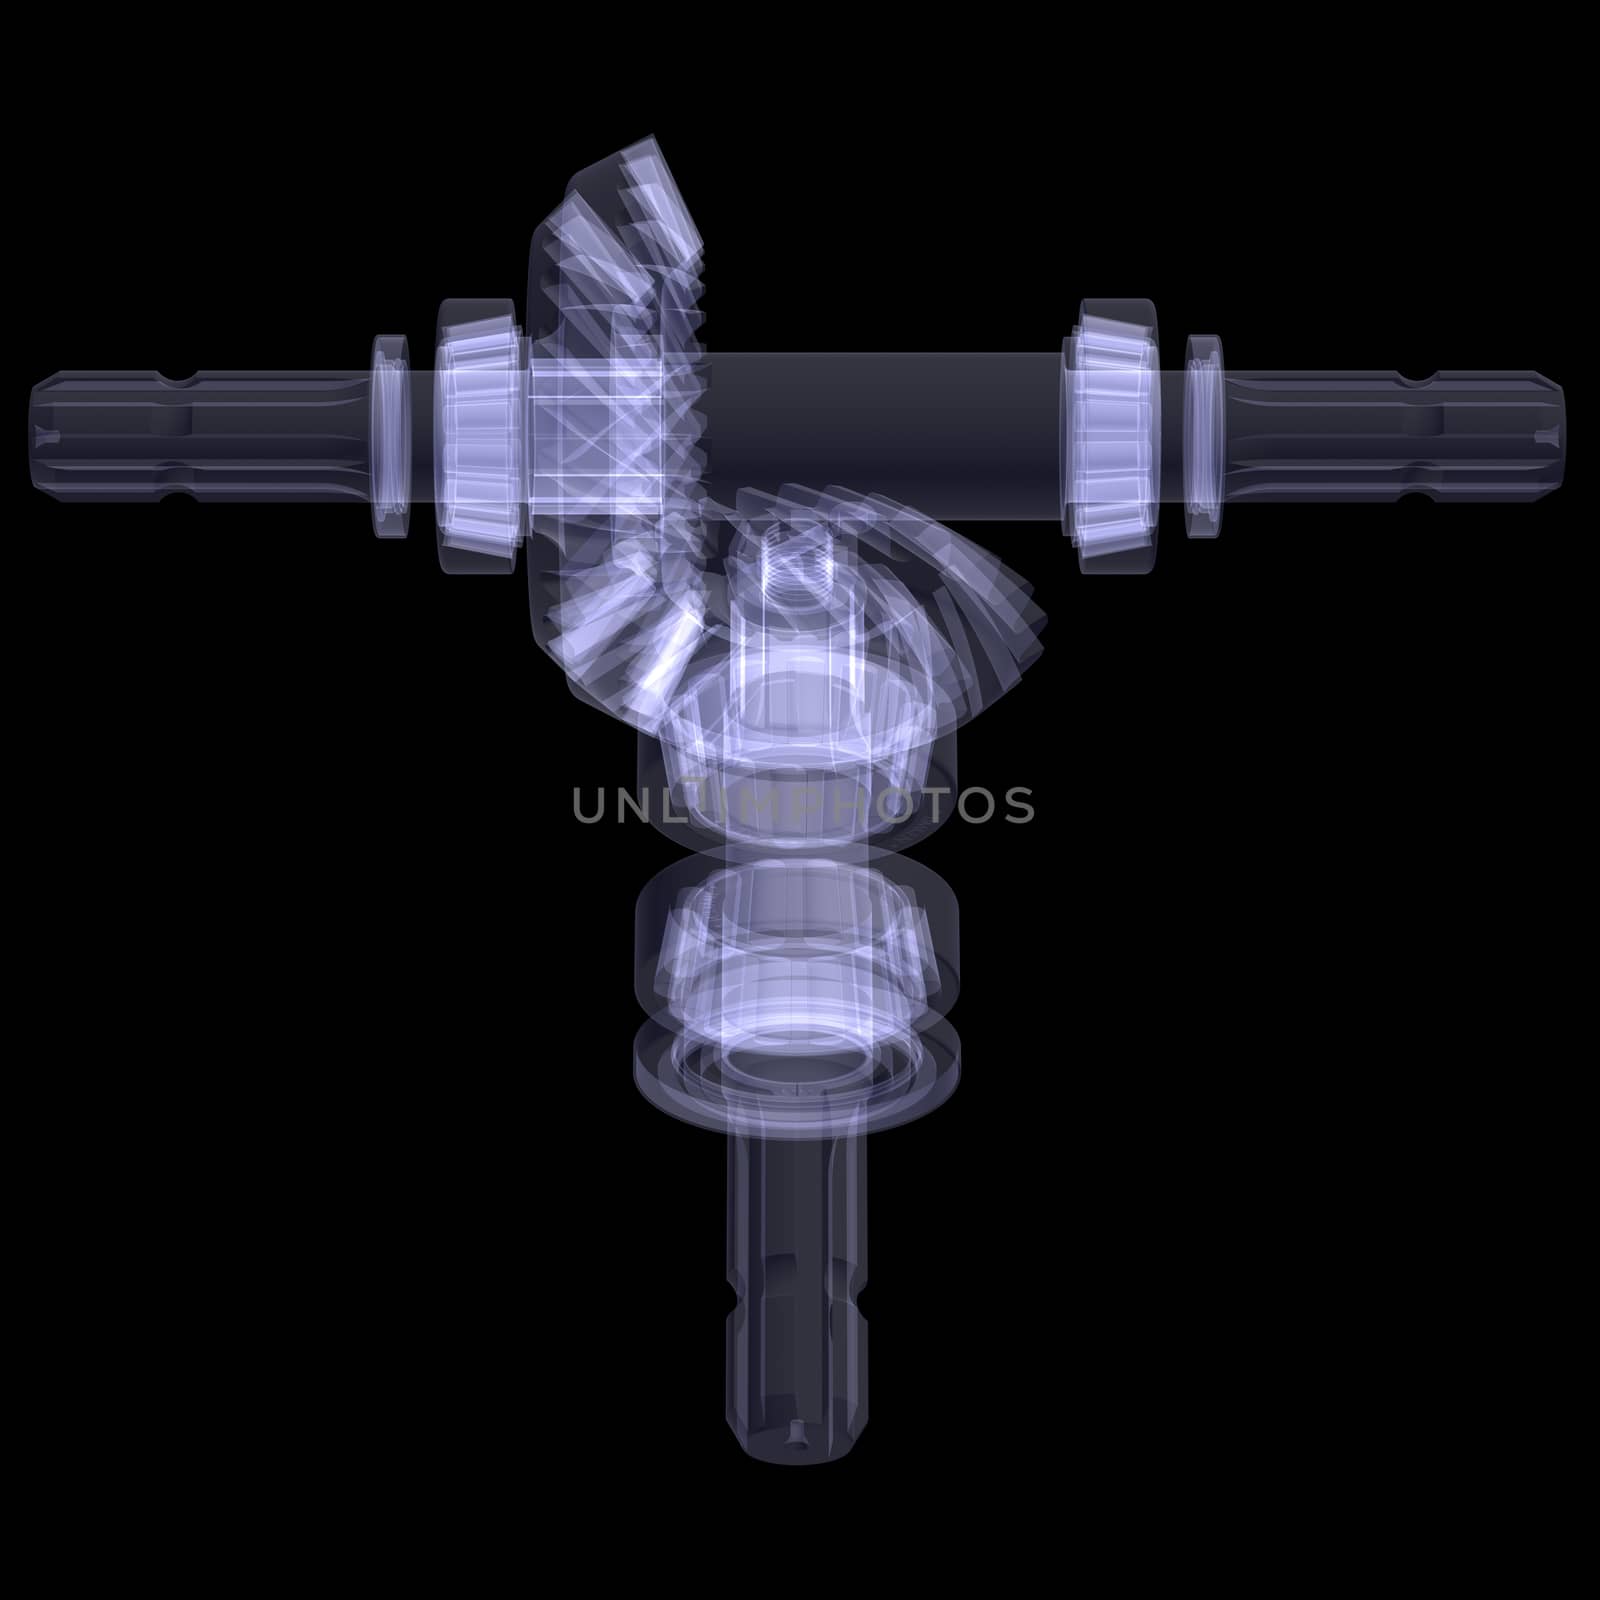 Hypoid gear. X-ray render. Isolated on a black background